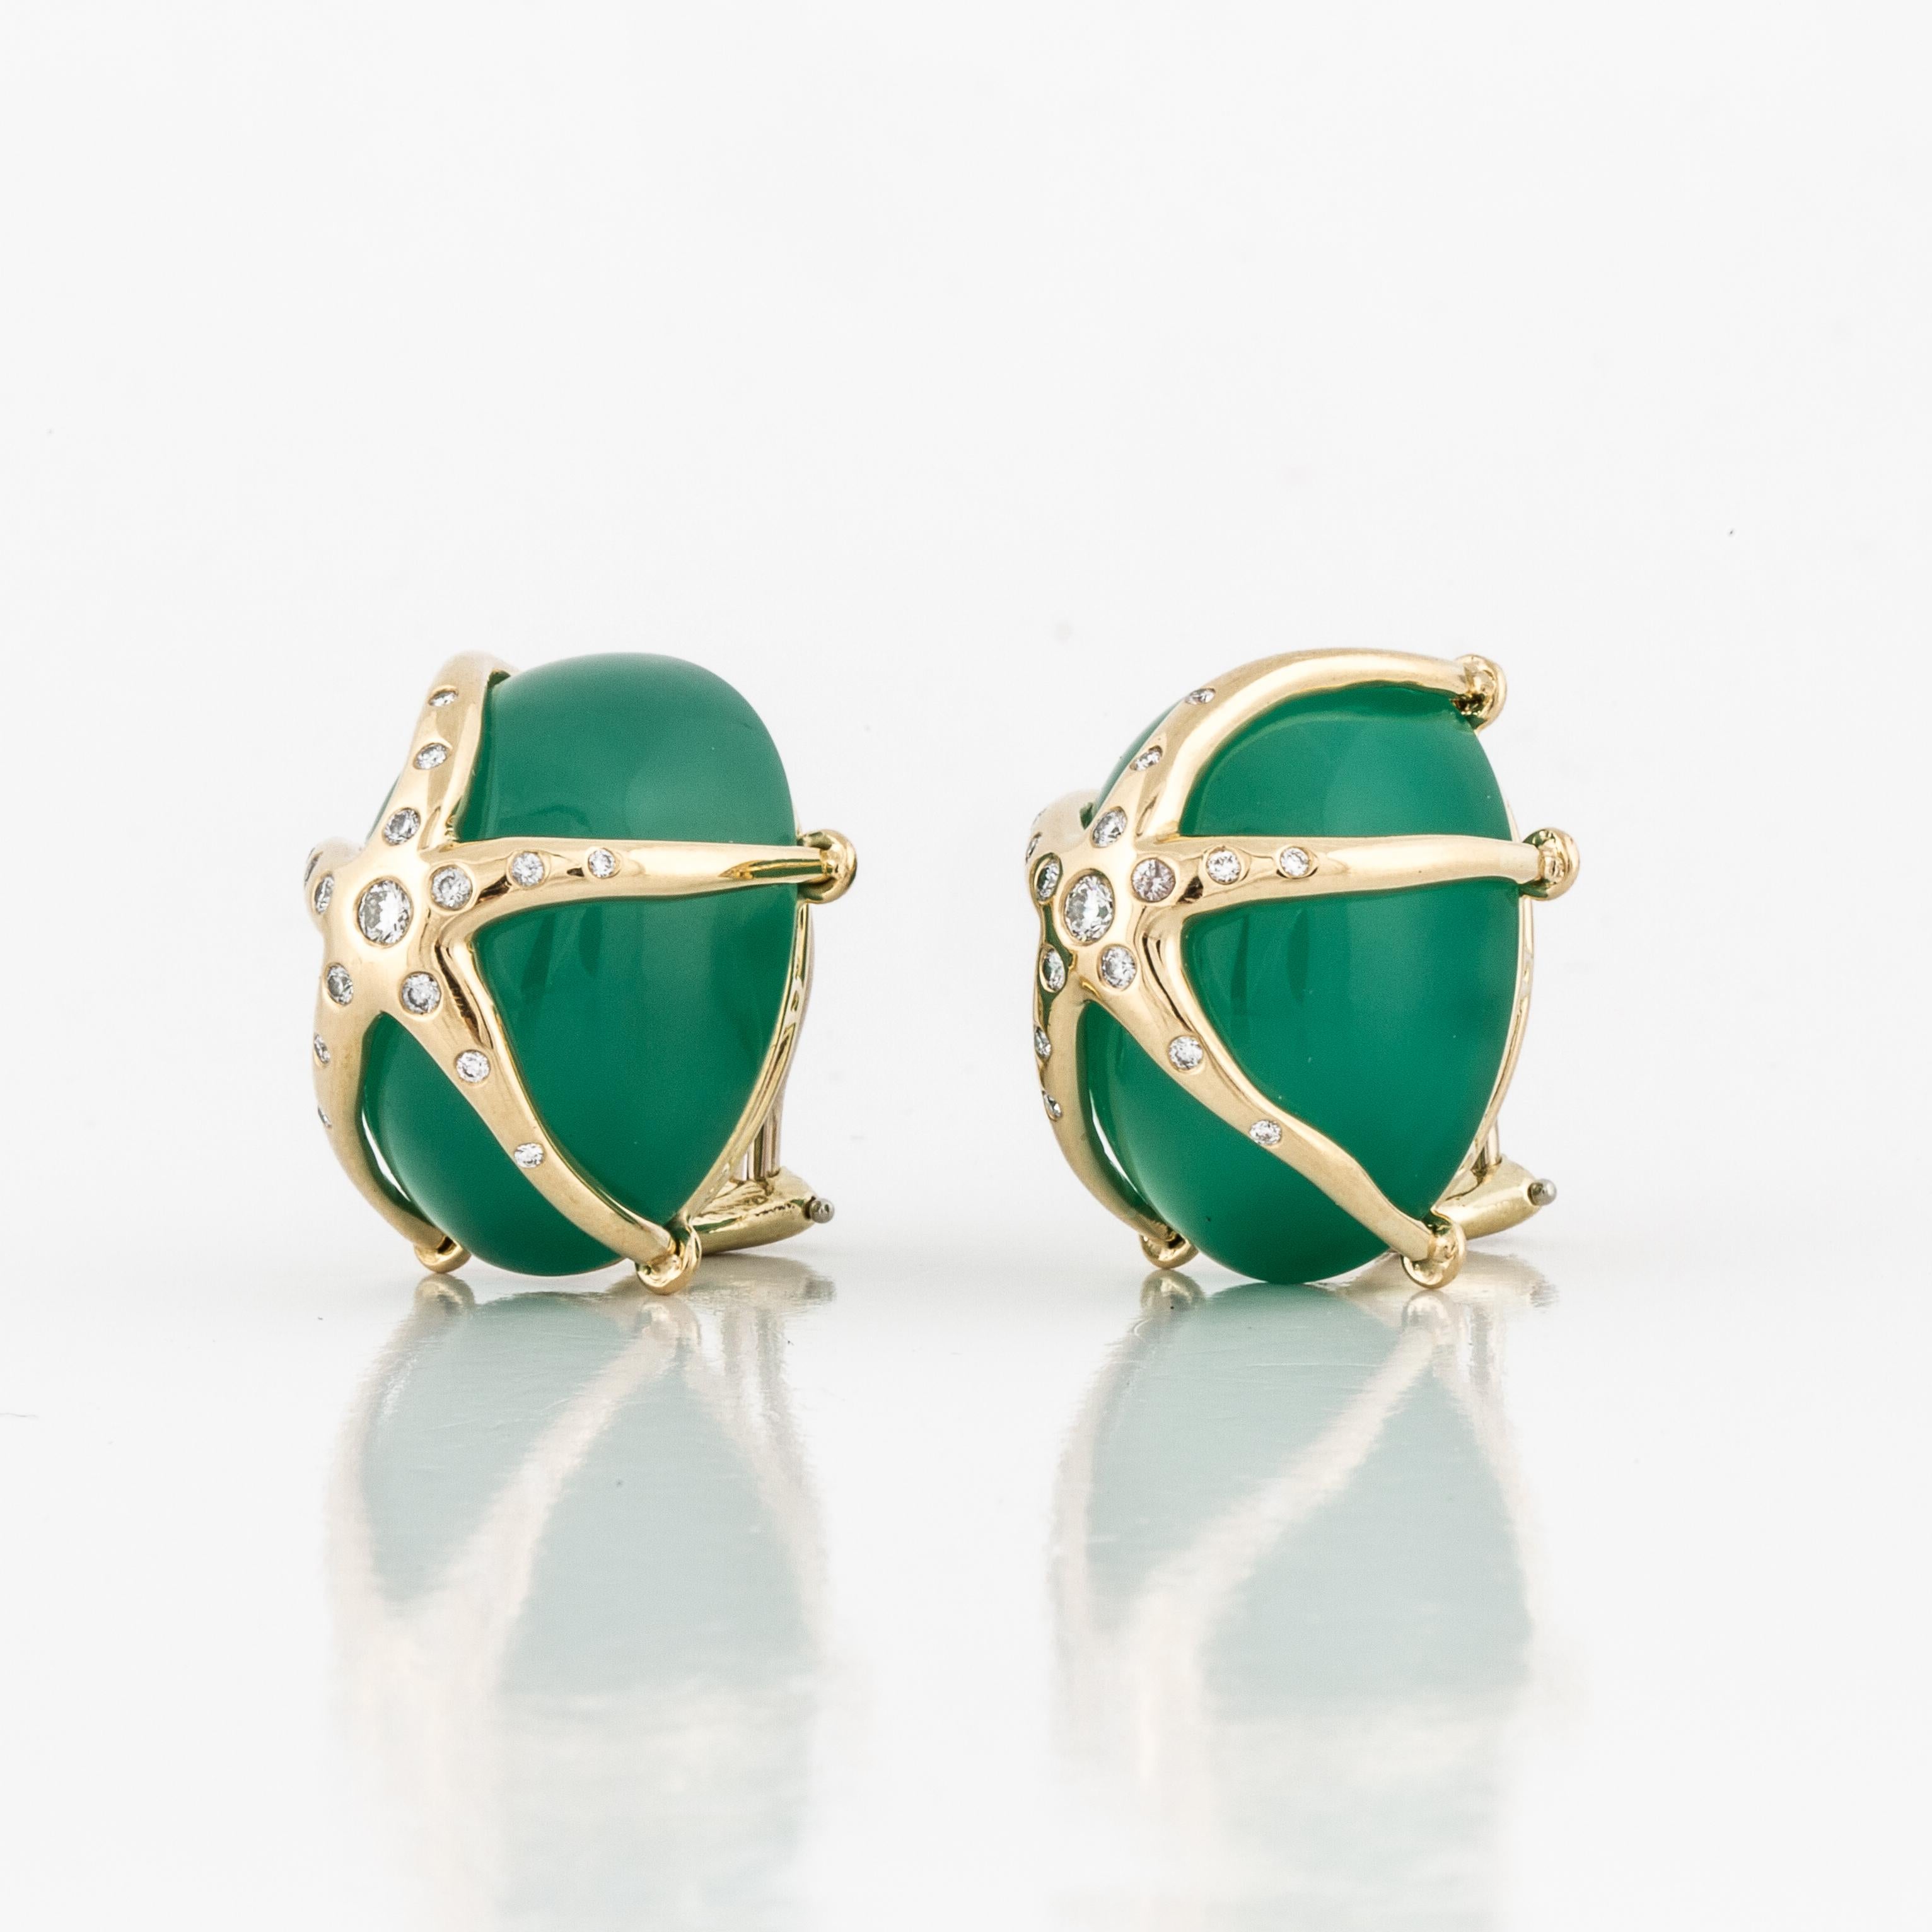 Ron McNamer earrings in 18K yellow gold featuring chrysoprase accented by round diamonds.  They are marked 